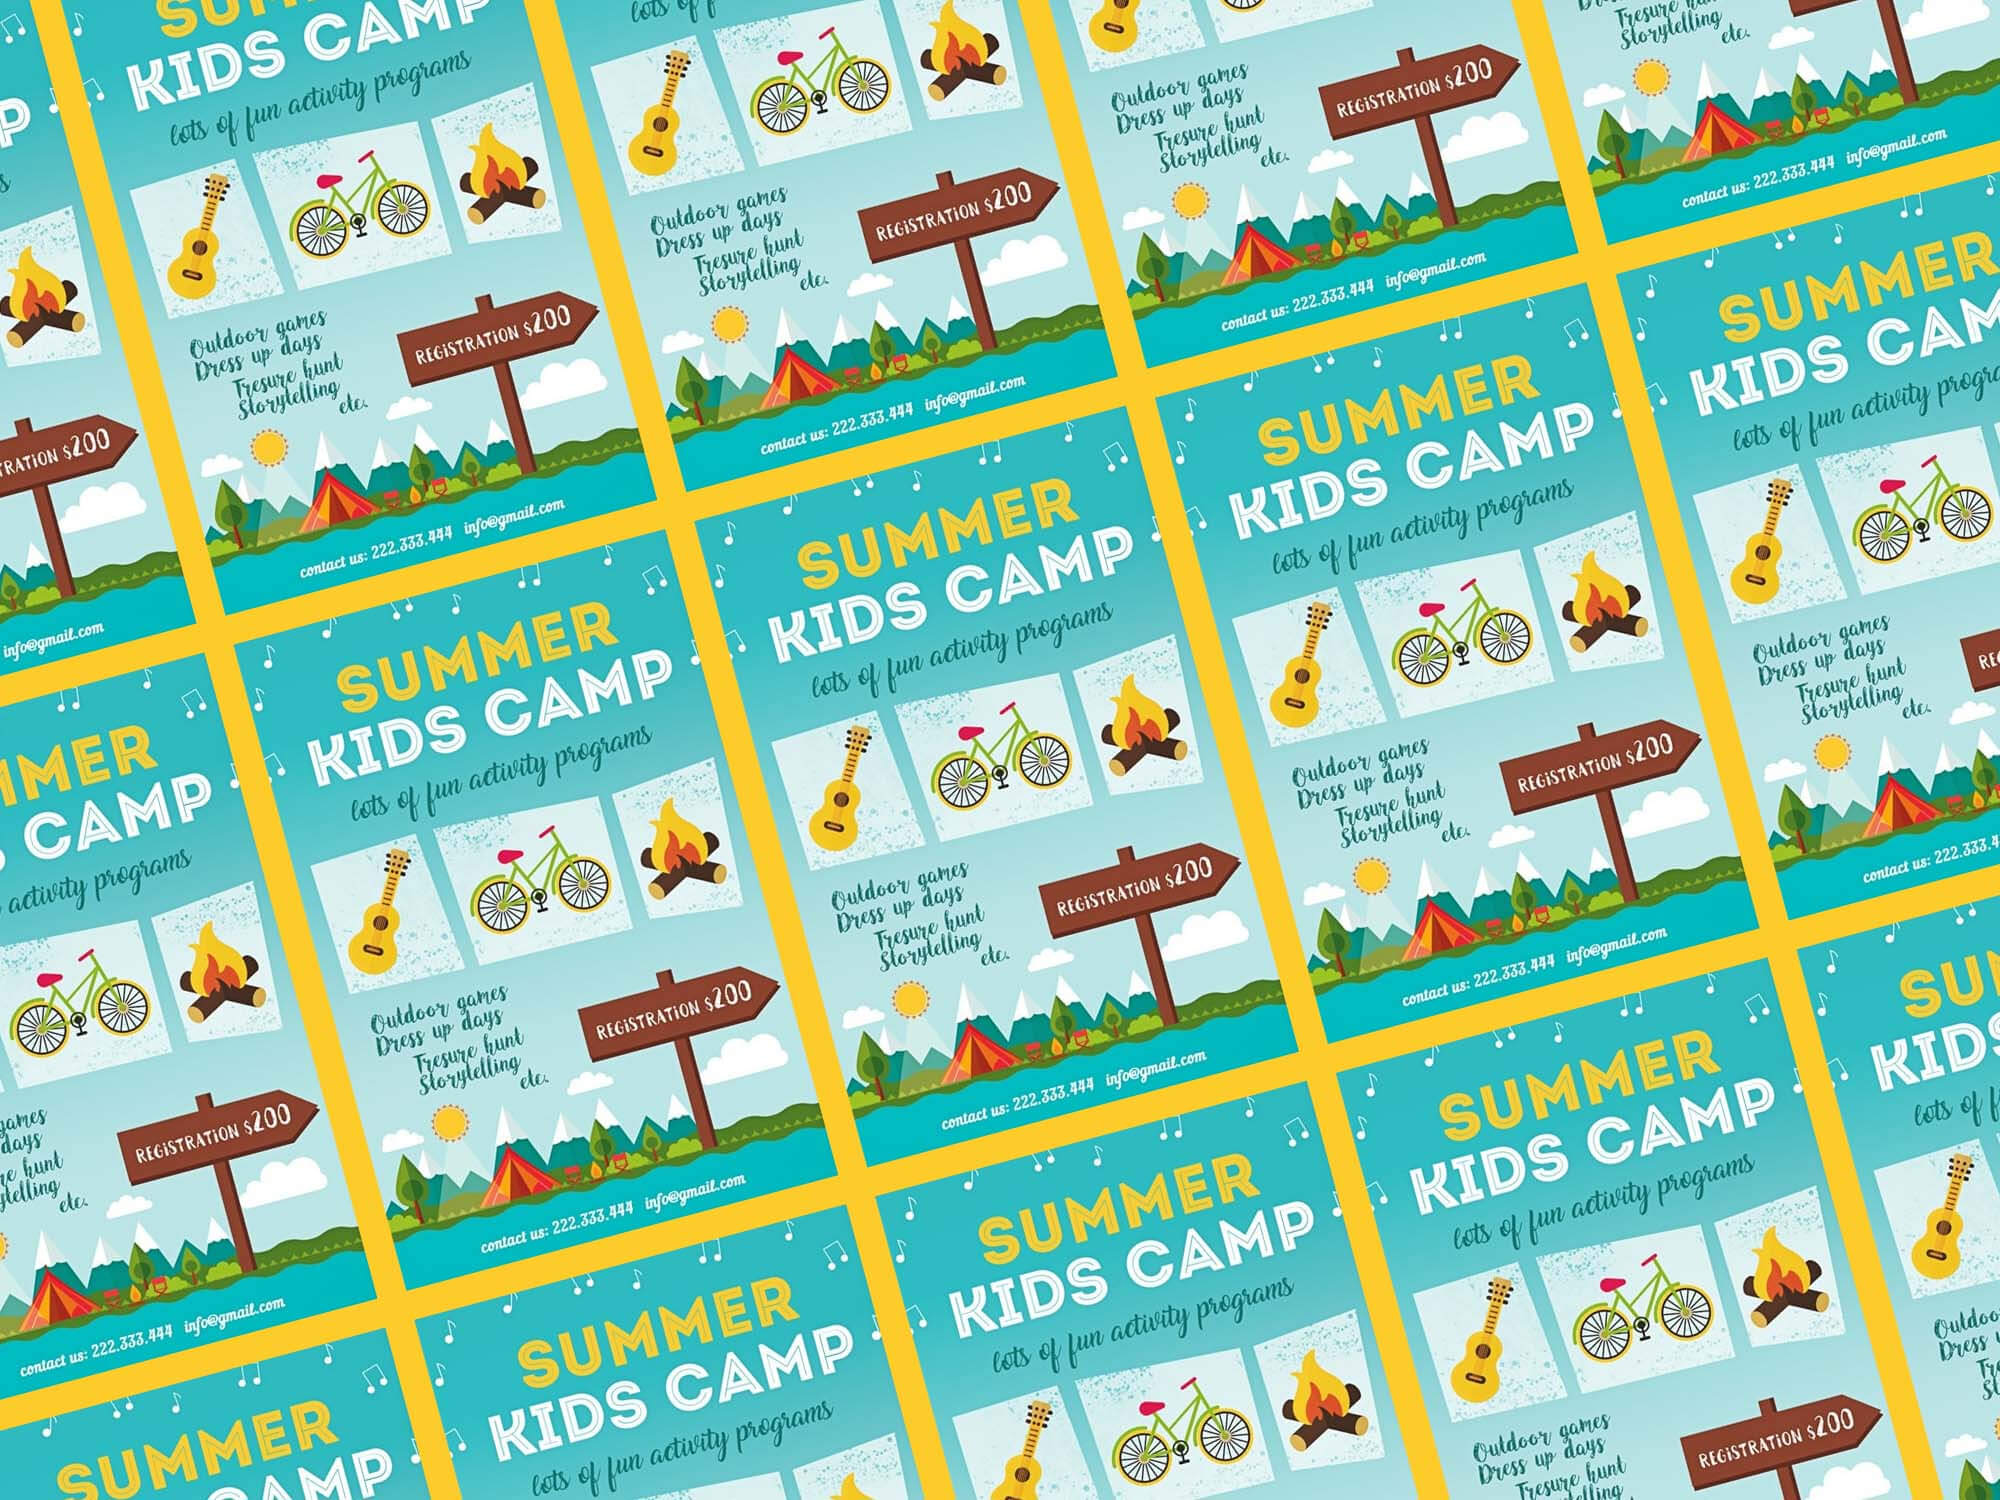 Free Summer Kids Camp Flyer Template (Psd) Intended For Summer Camp Brochure Template Free Download